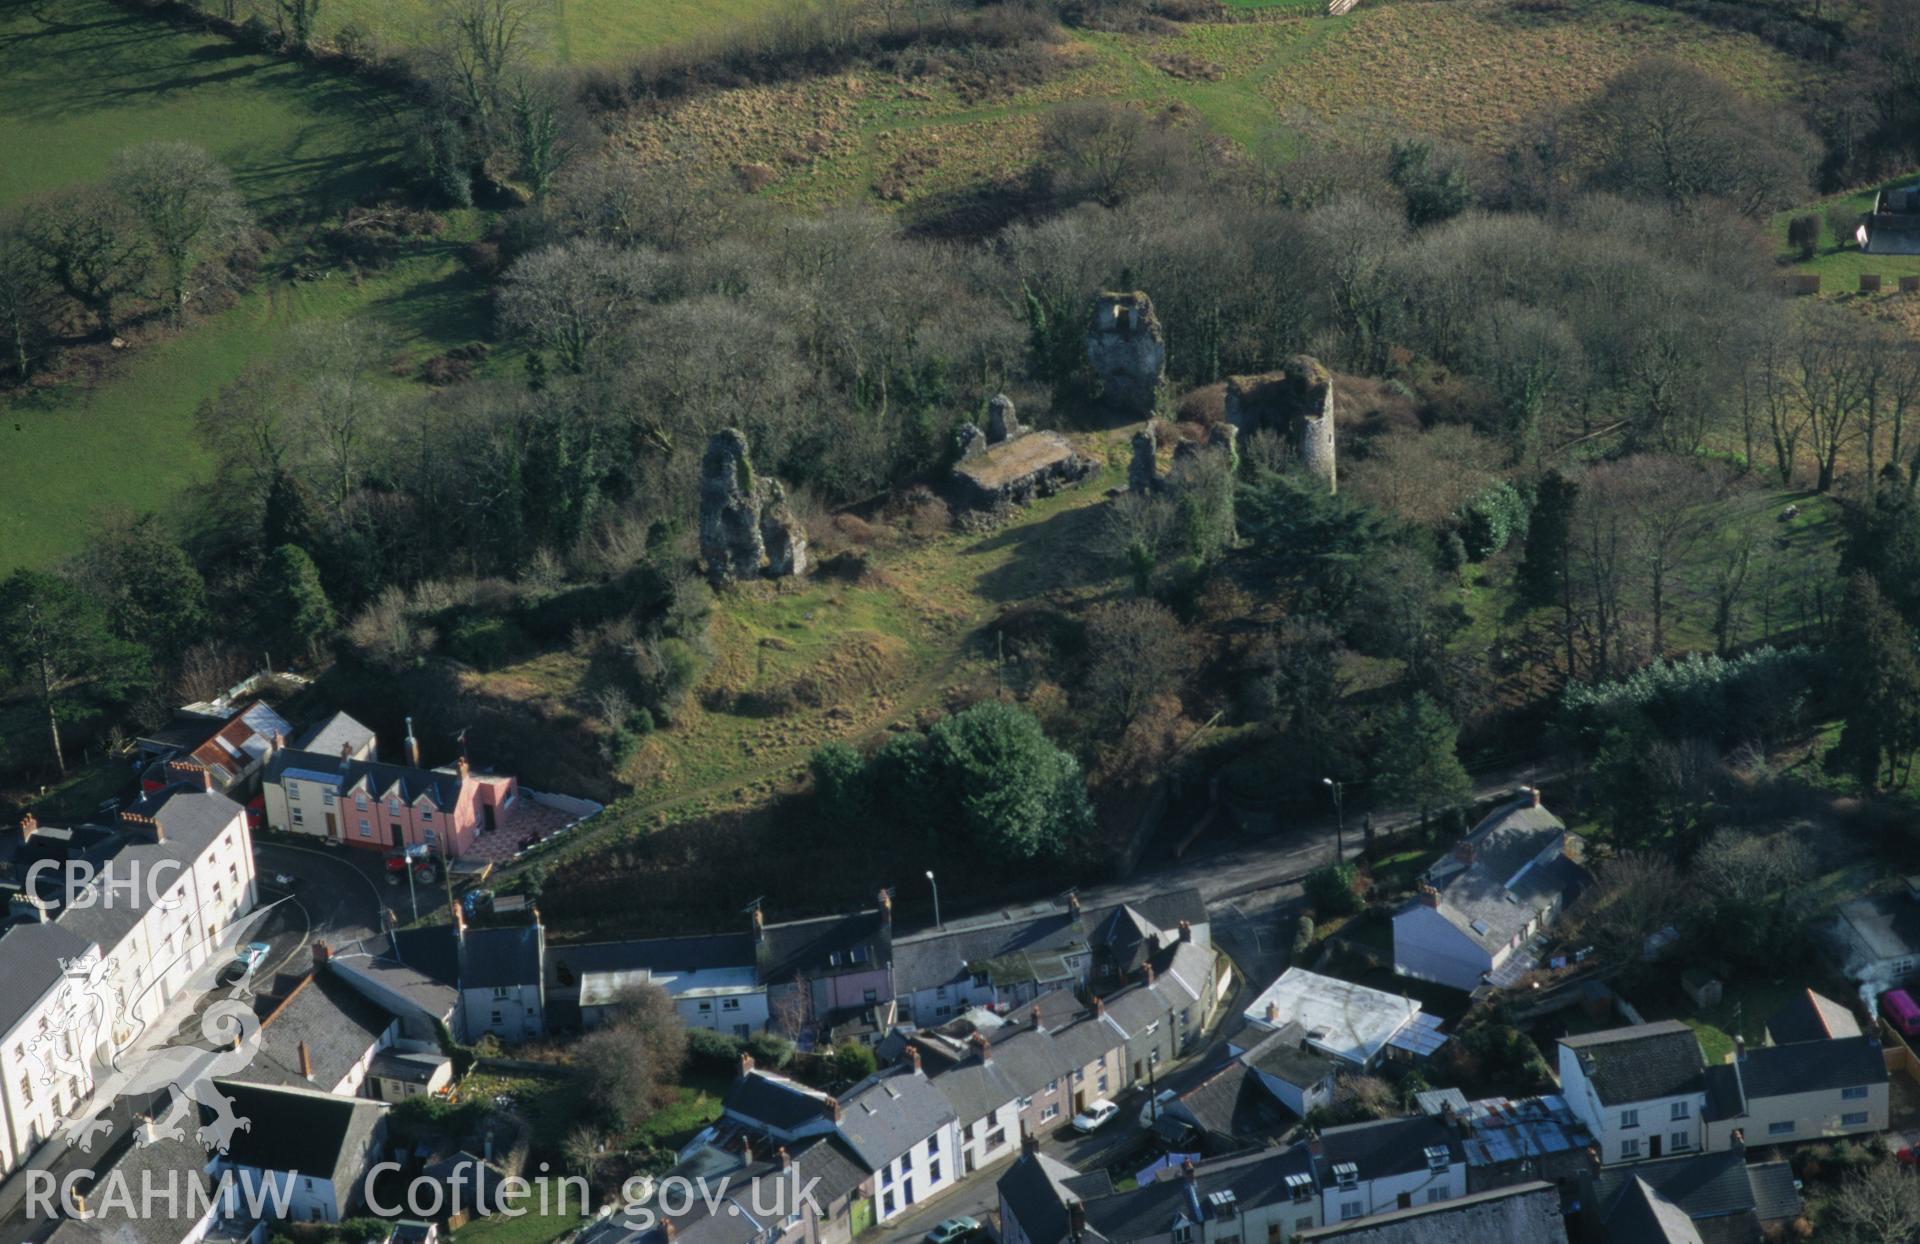 Slide of RCAHMW colour oblique aerial photograph of Narberth Castle, taken by C.R. Musson, 2/2/1997.